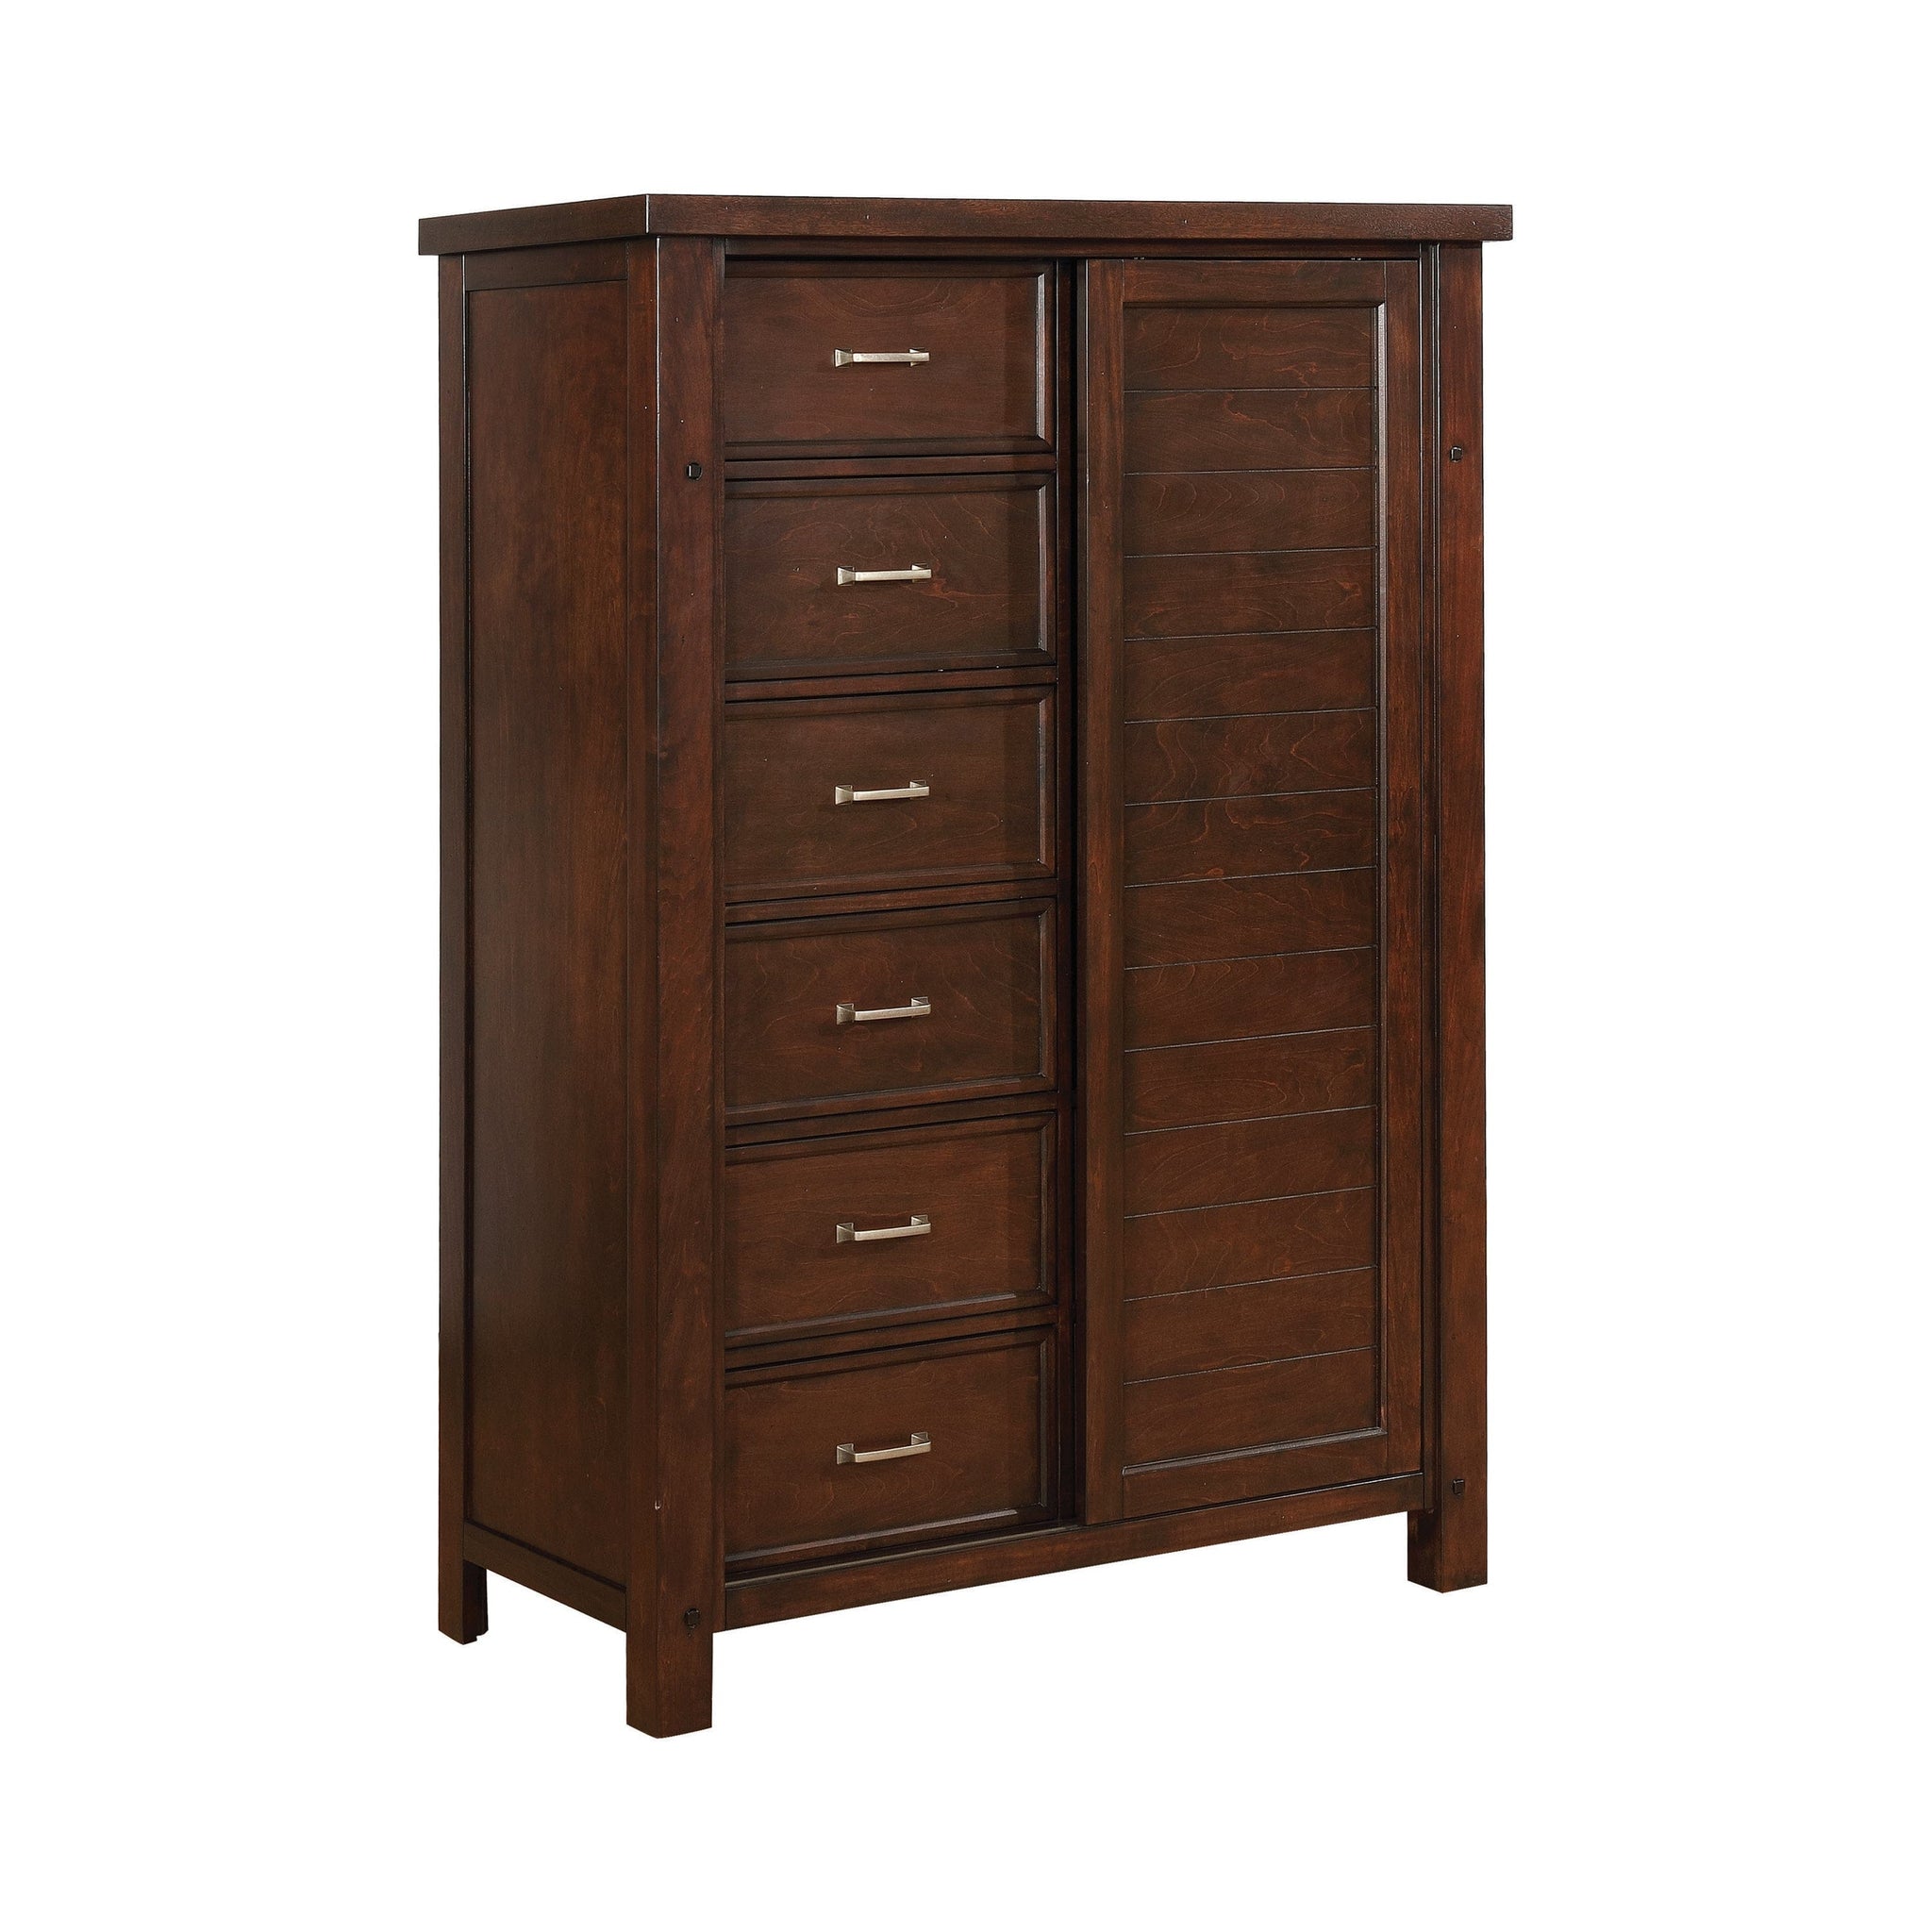 Barstow 8-Drawer Door Chest Pinot Noir Collection: Barstow SKU: 206436